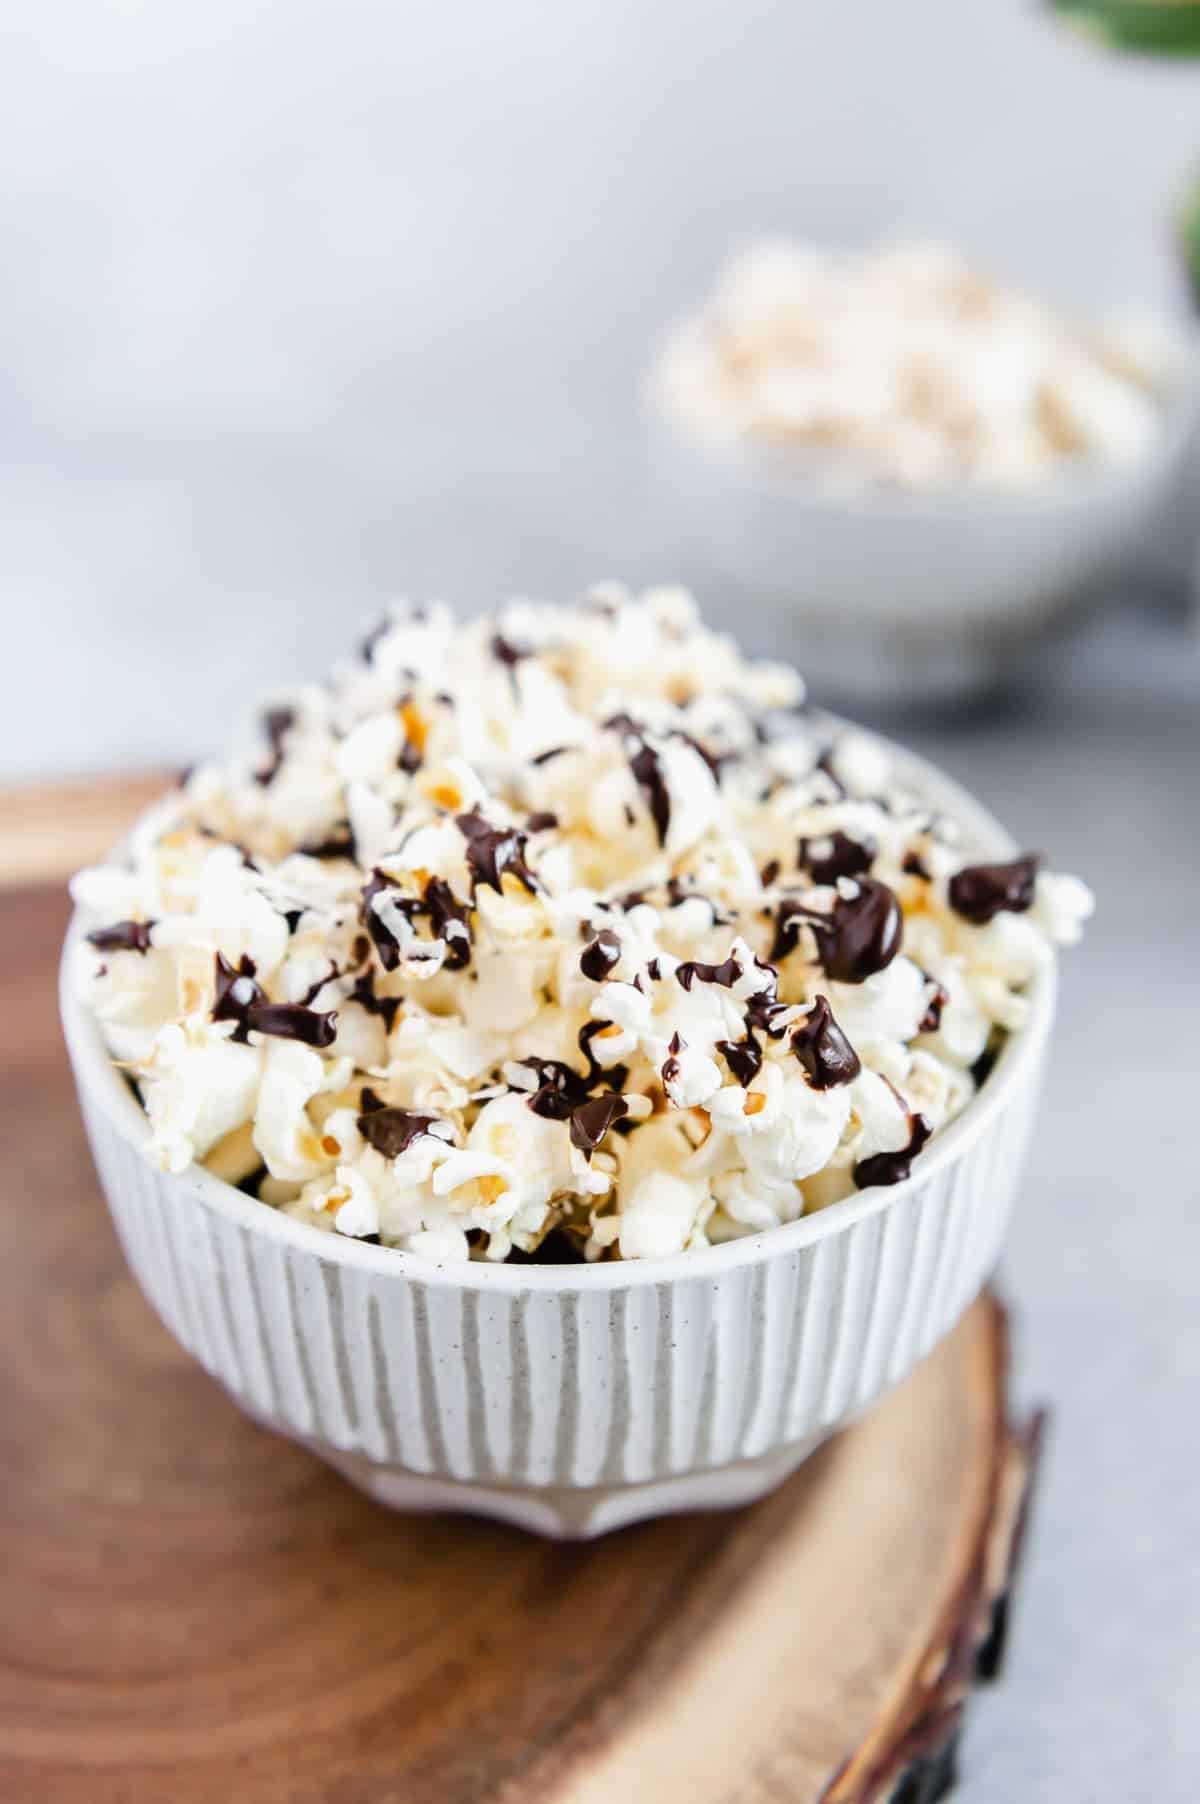 Upclose photo of a bowl of chocolate coconut popcorn.